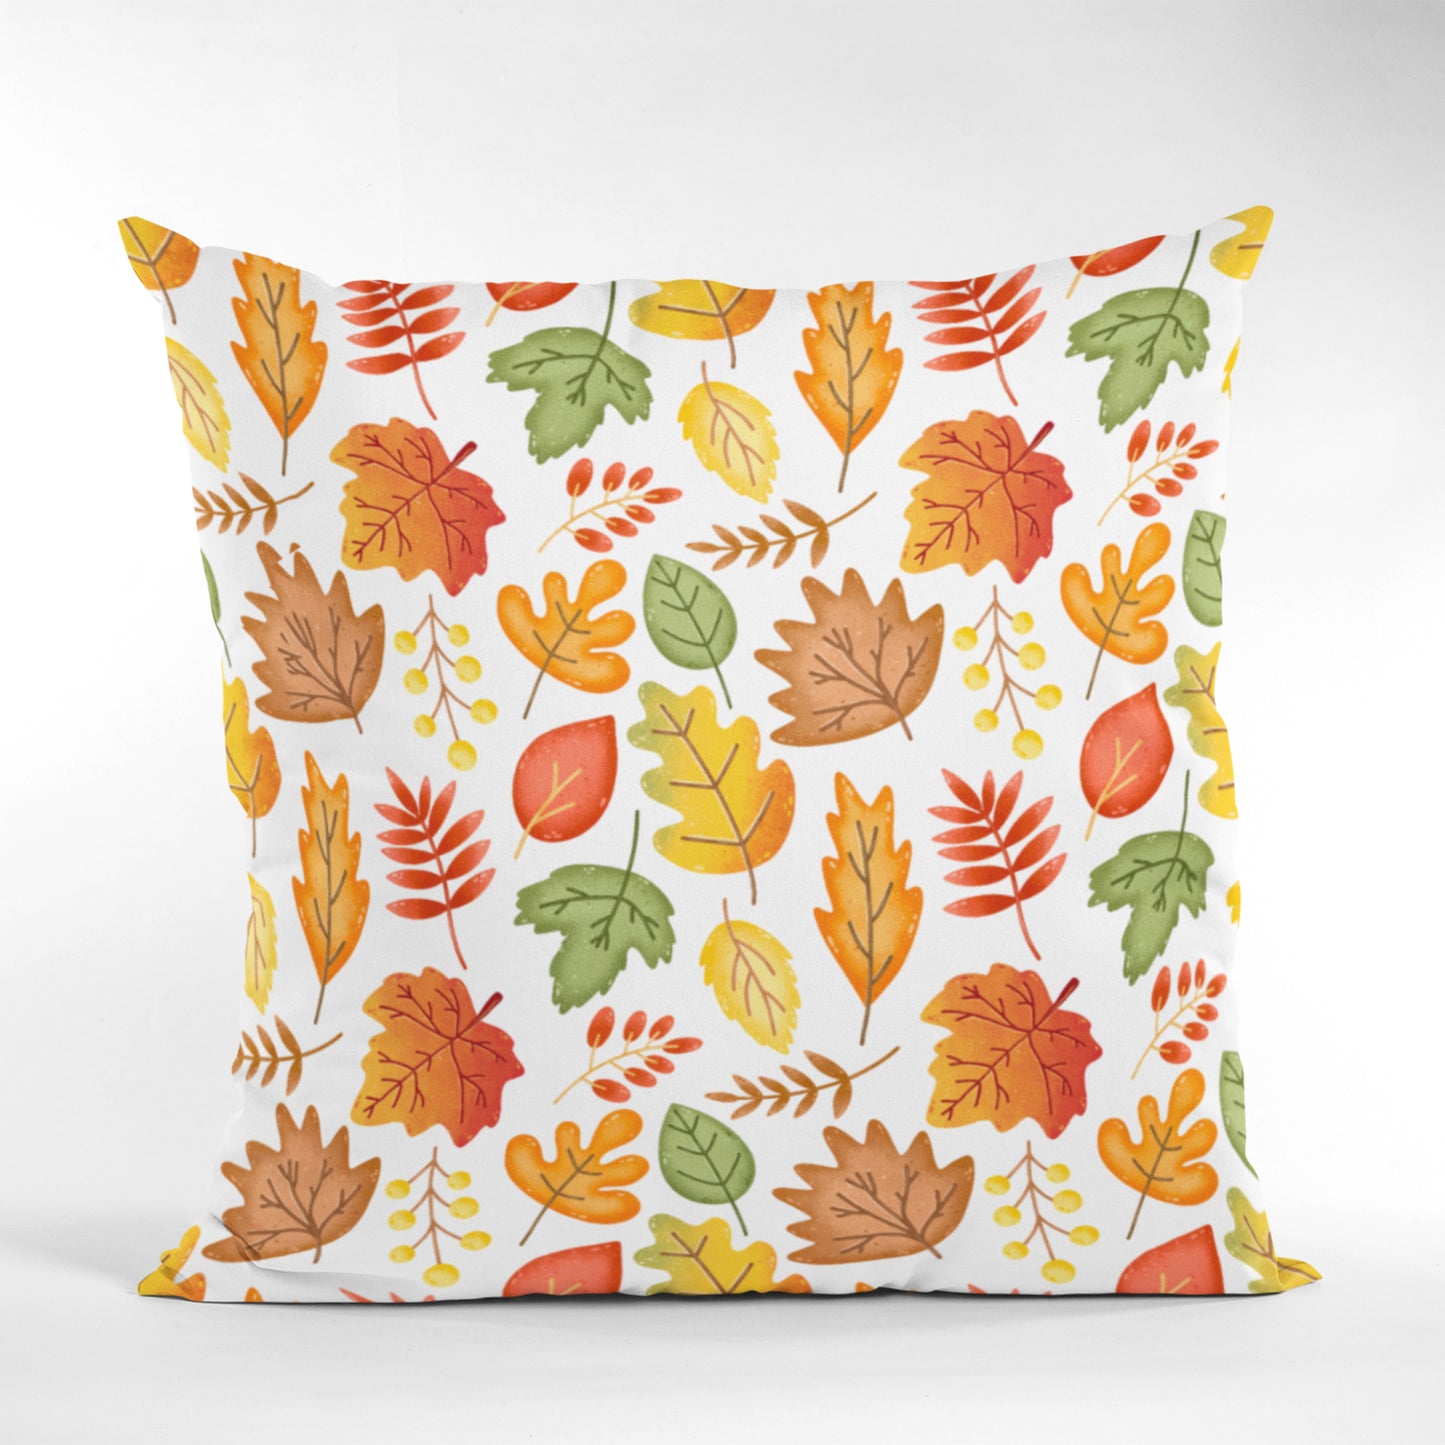 Fall Leaves Pattern Cushion Cover, Autumn Home Decoration Throw Pillow by Homeezone